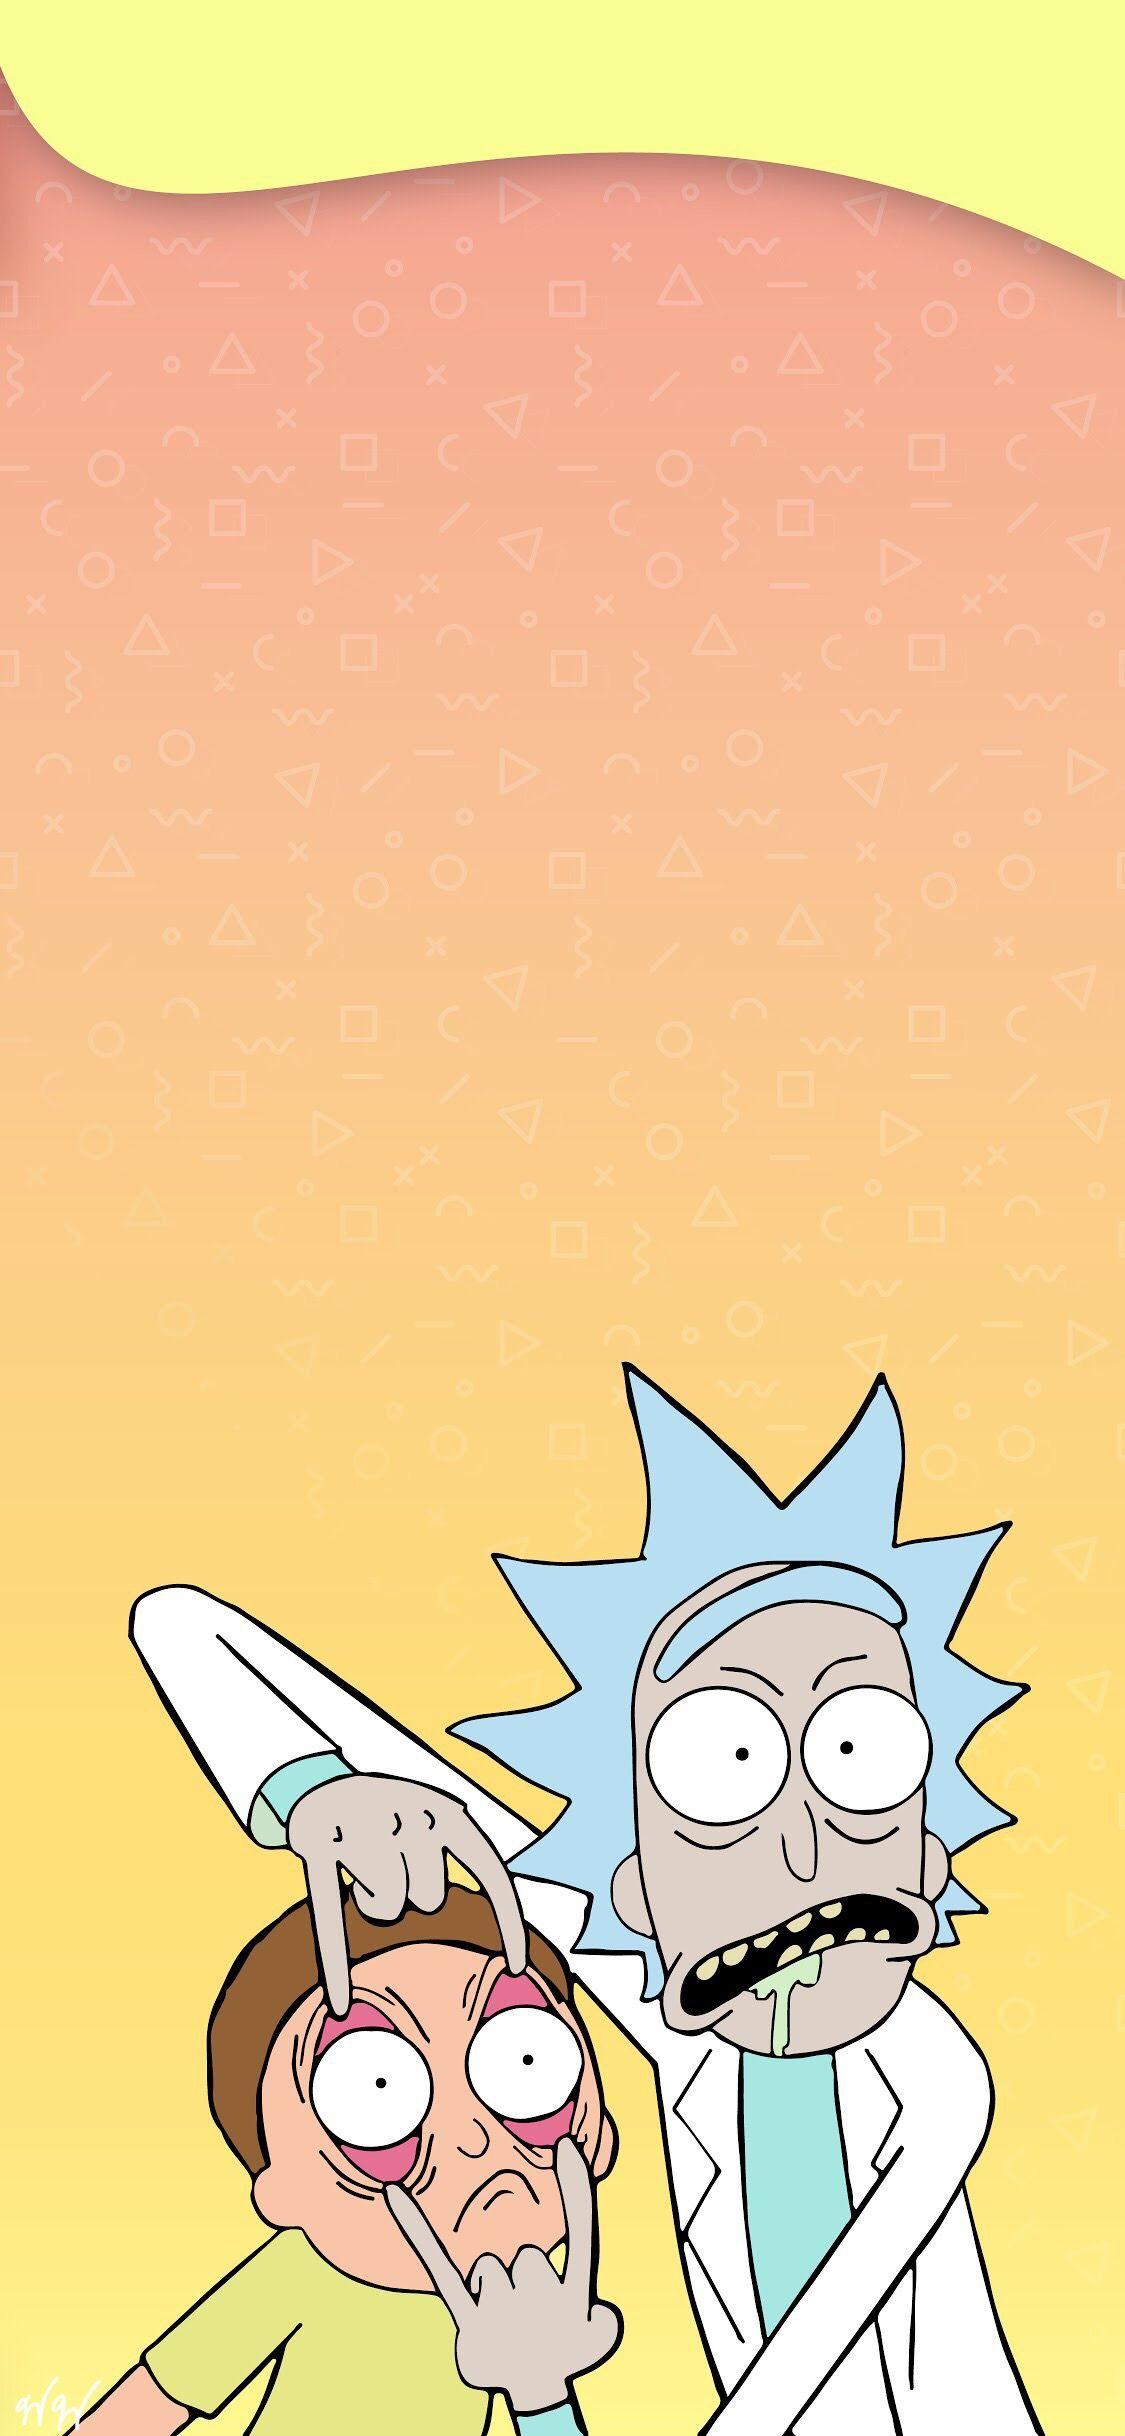 Custom Rick and Morty iPhone X wallpaper by Weston Watson. iPhone wallpaper rick and morty, Rick and morty poster, Rick i morty